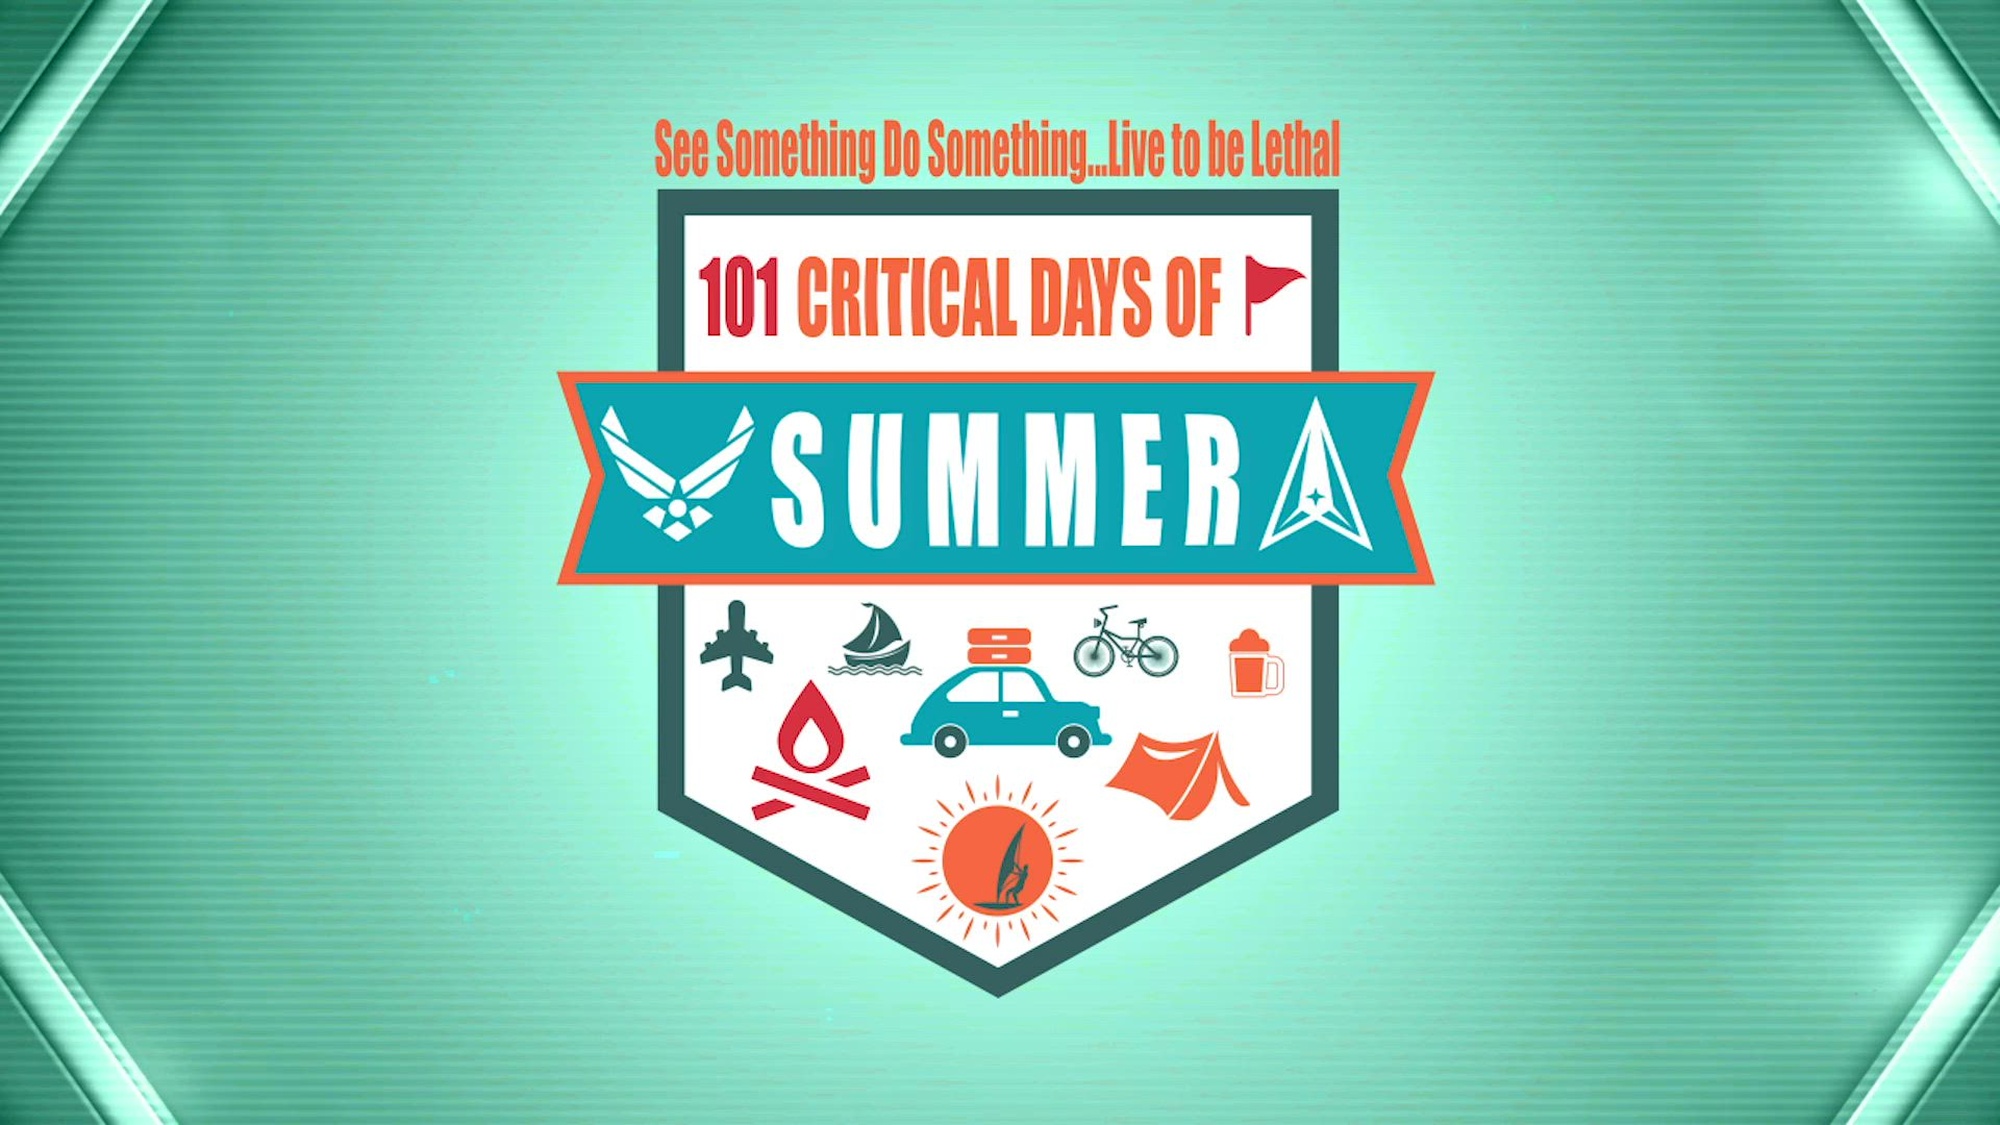 The 101 Critical Days of Summer runs from Memorial Day through Labor Day and this year the Department of the Air Force is highlighting Off-Duty Risk Management and Defending the Human Weapon System. During the 101 CDS campaign the DAF suggests that every Airmen and Guardian evaluate those risky summer activities and their skill levels before participating in them.